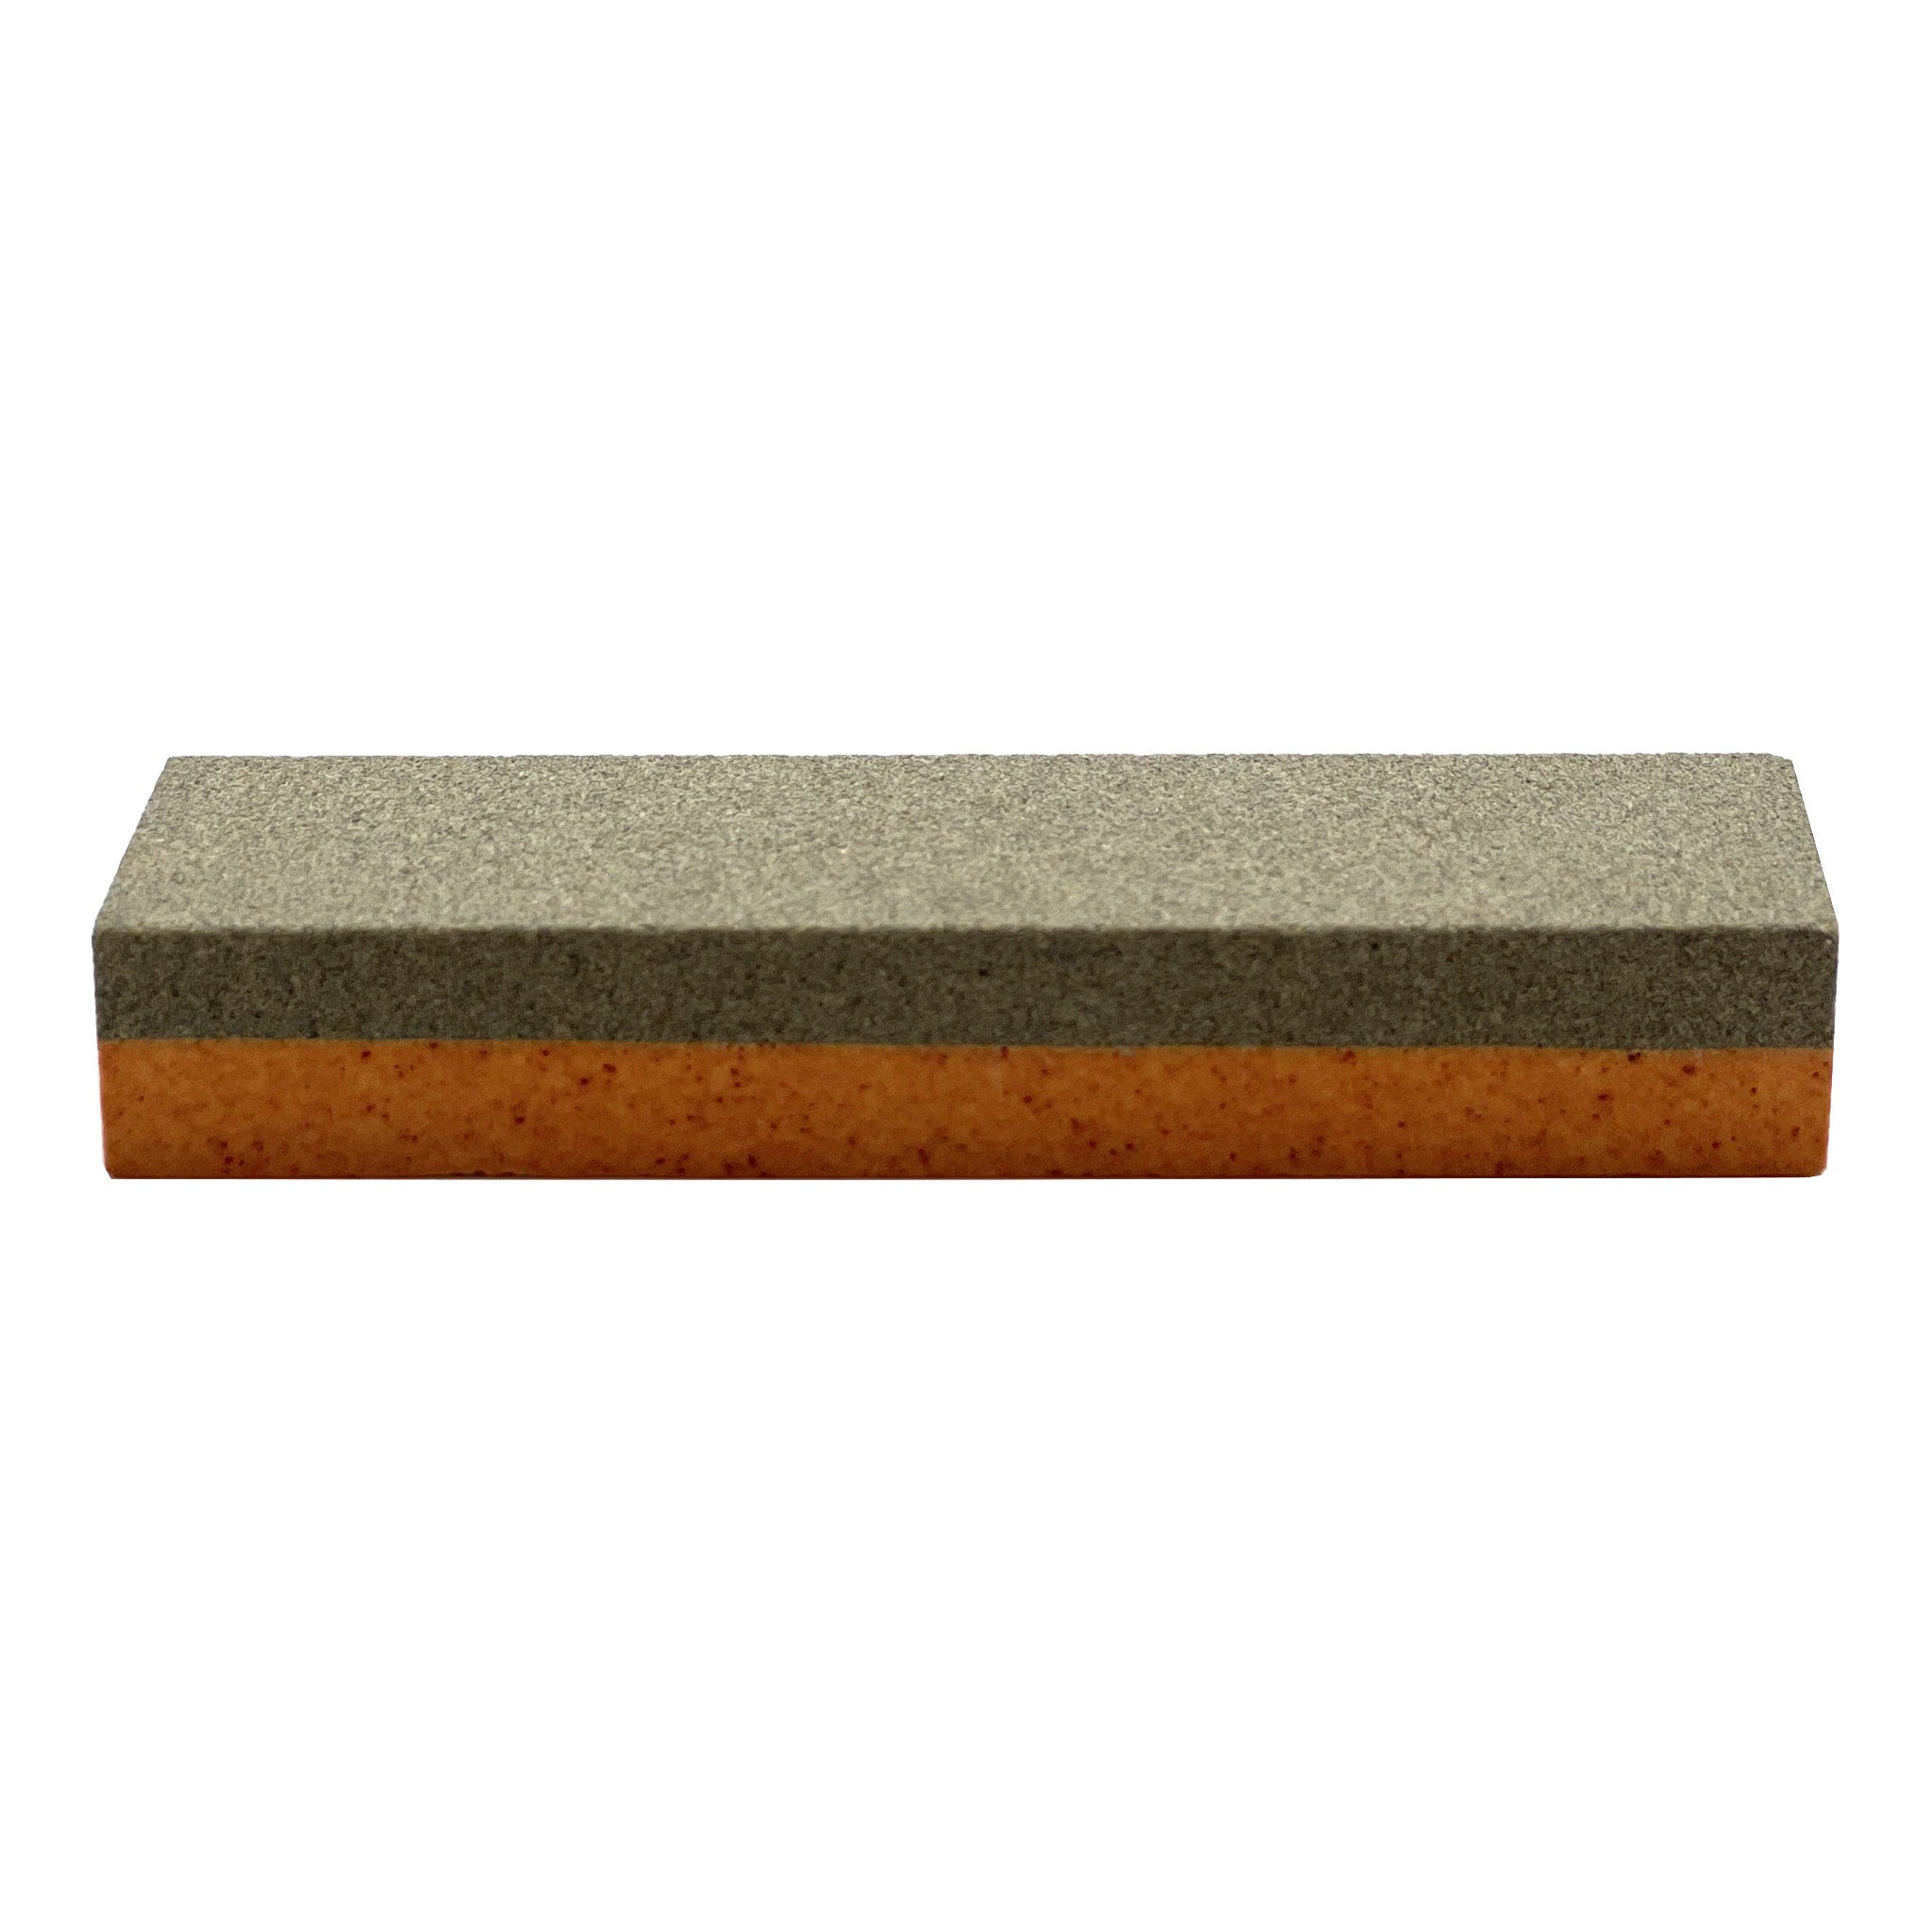 The STAGE Dual-Sided Pocket Stone is the ultimate heavy-duty sanding stone featuring one fine side and one coarse side. Use the coarse side is used to remove any corrosion or hardened surfaces in your ski's edge. The fine side is perfect for routine edge maintenance and sharpening.